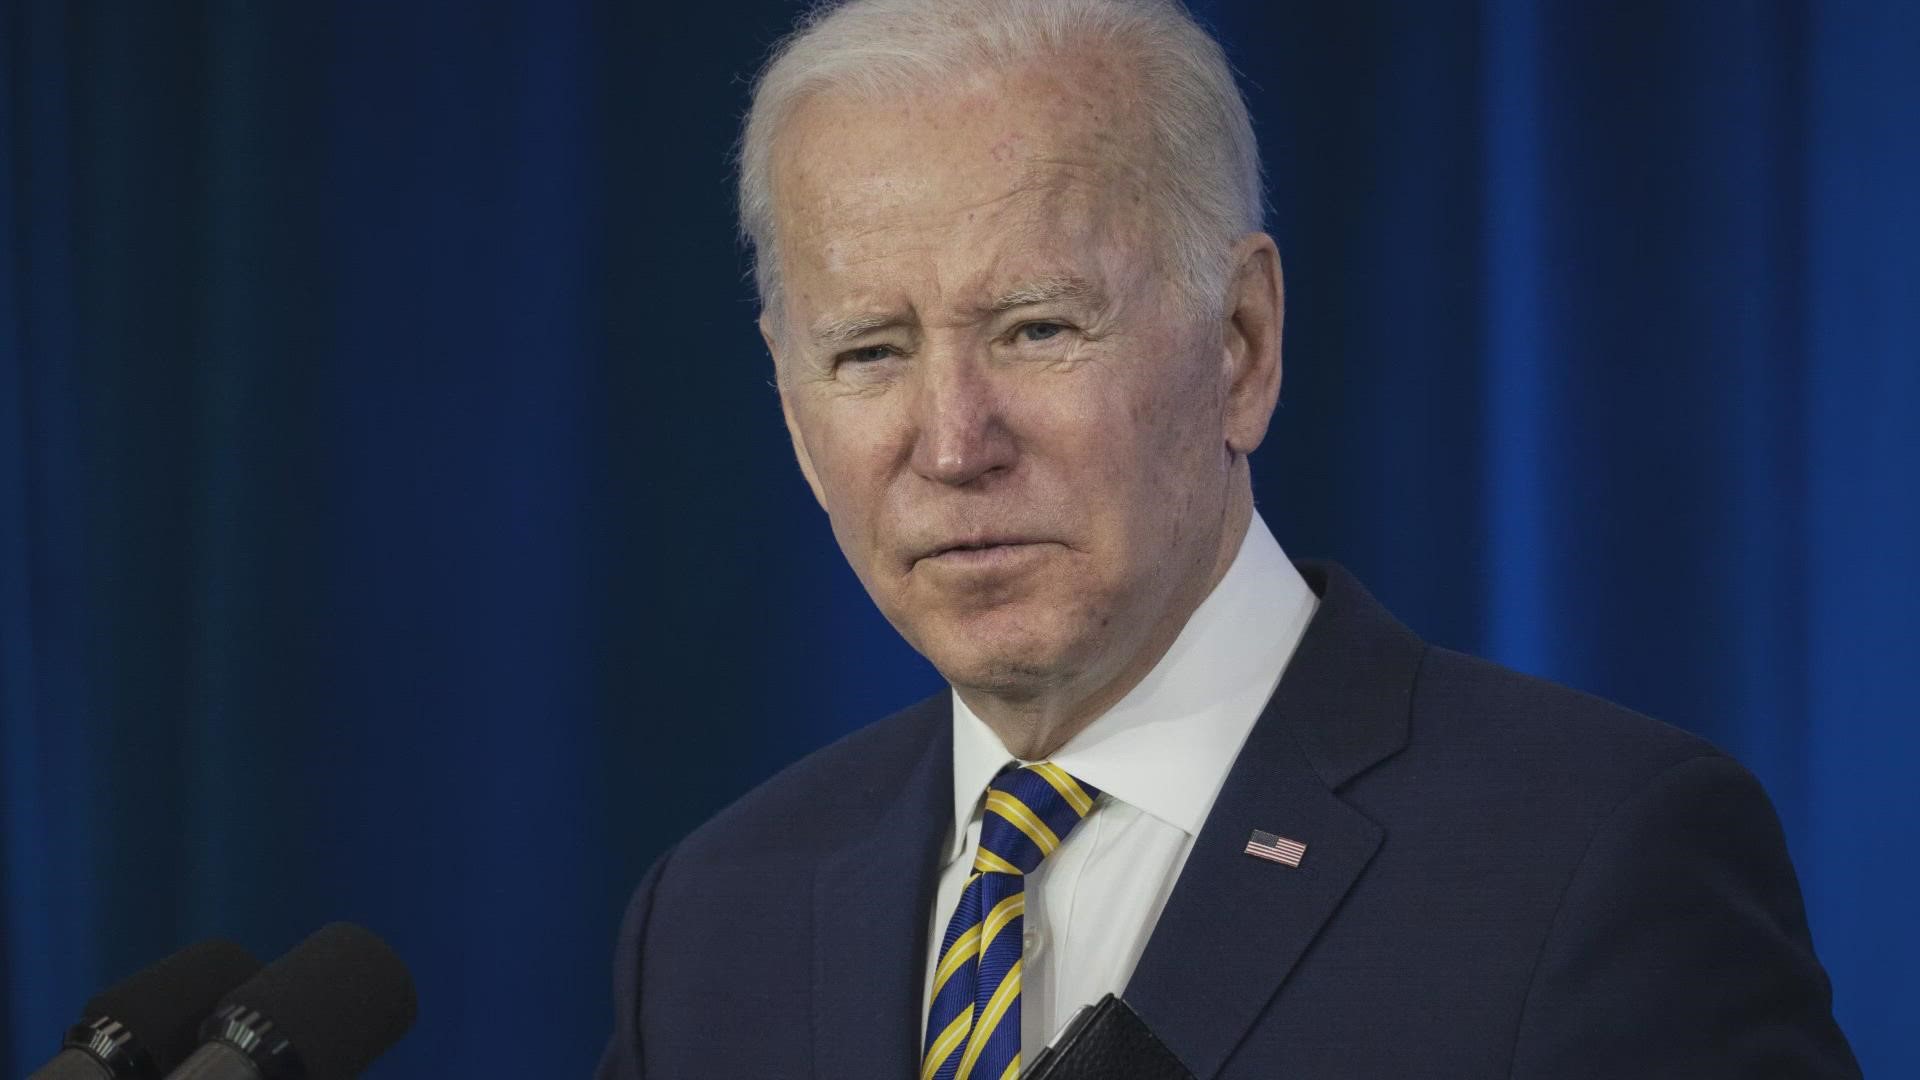 During his visit Friday, Biden gave remarks on green energy, signed an executive order and discussed efforts to lower health care and energy costs for families.